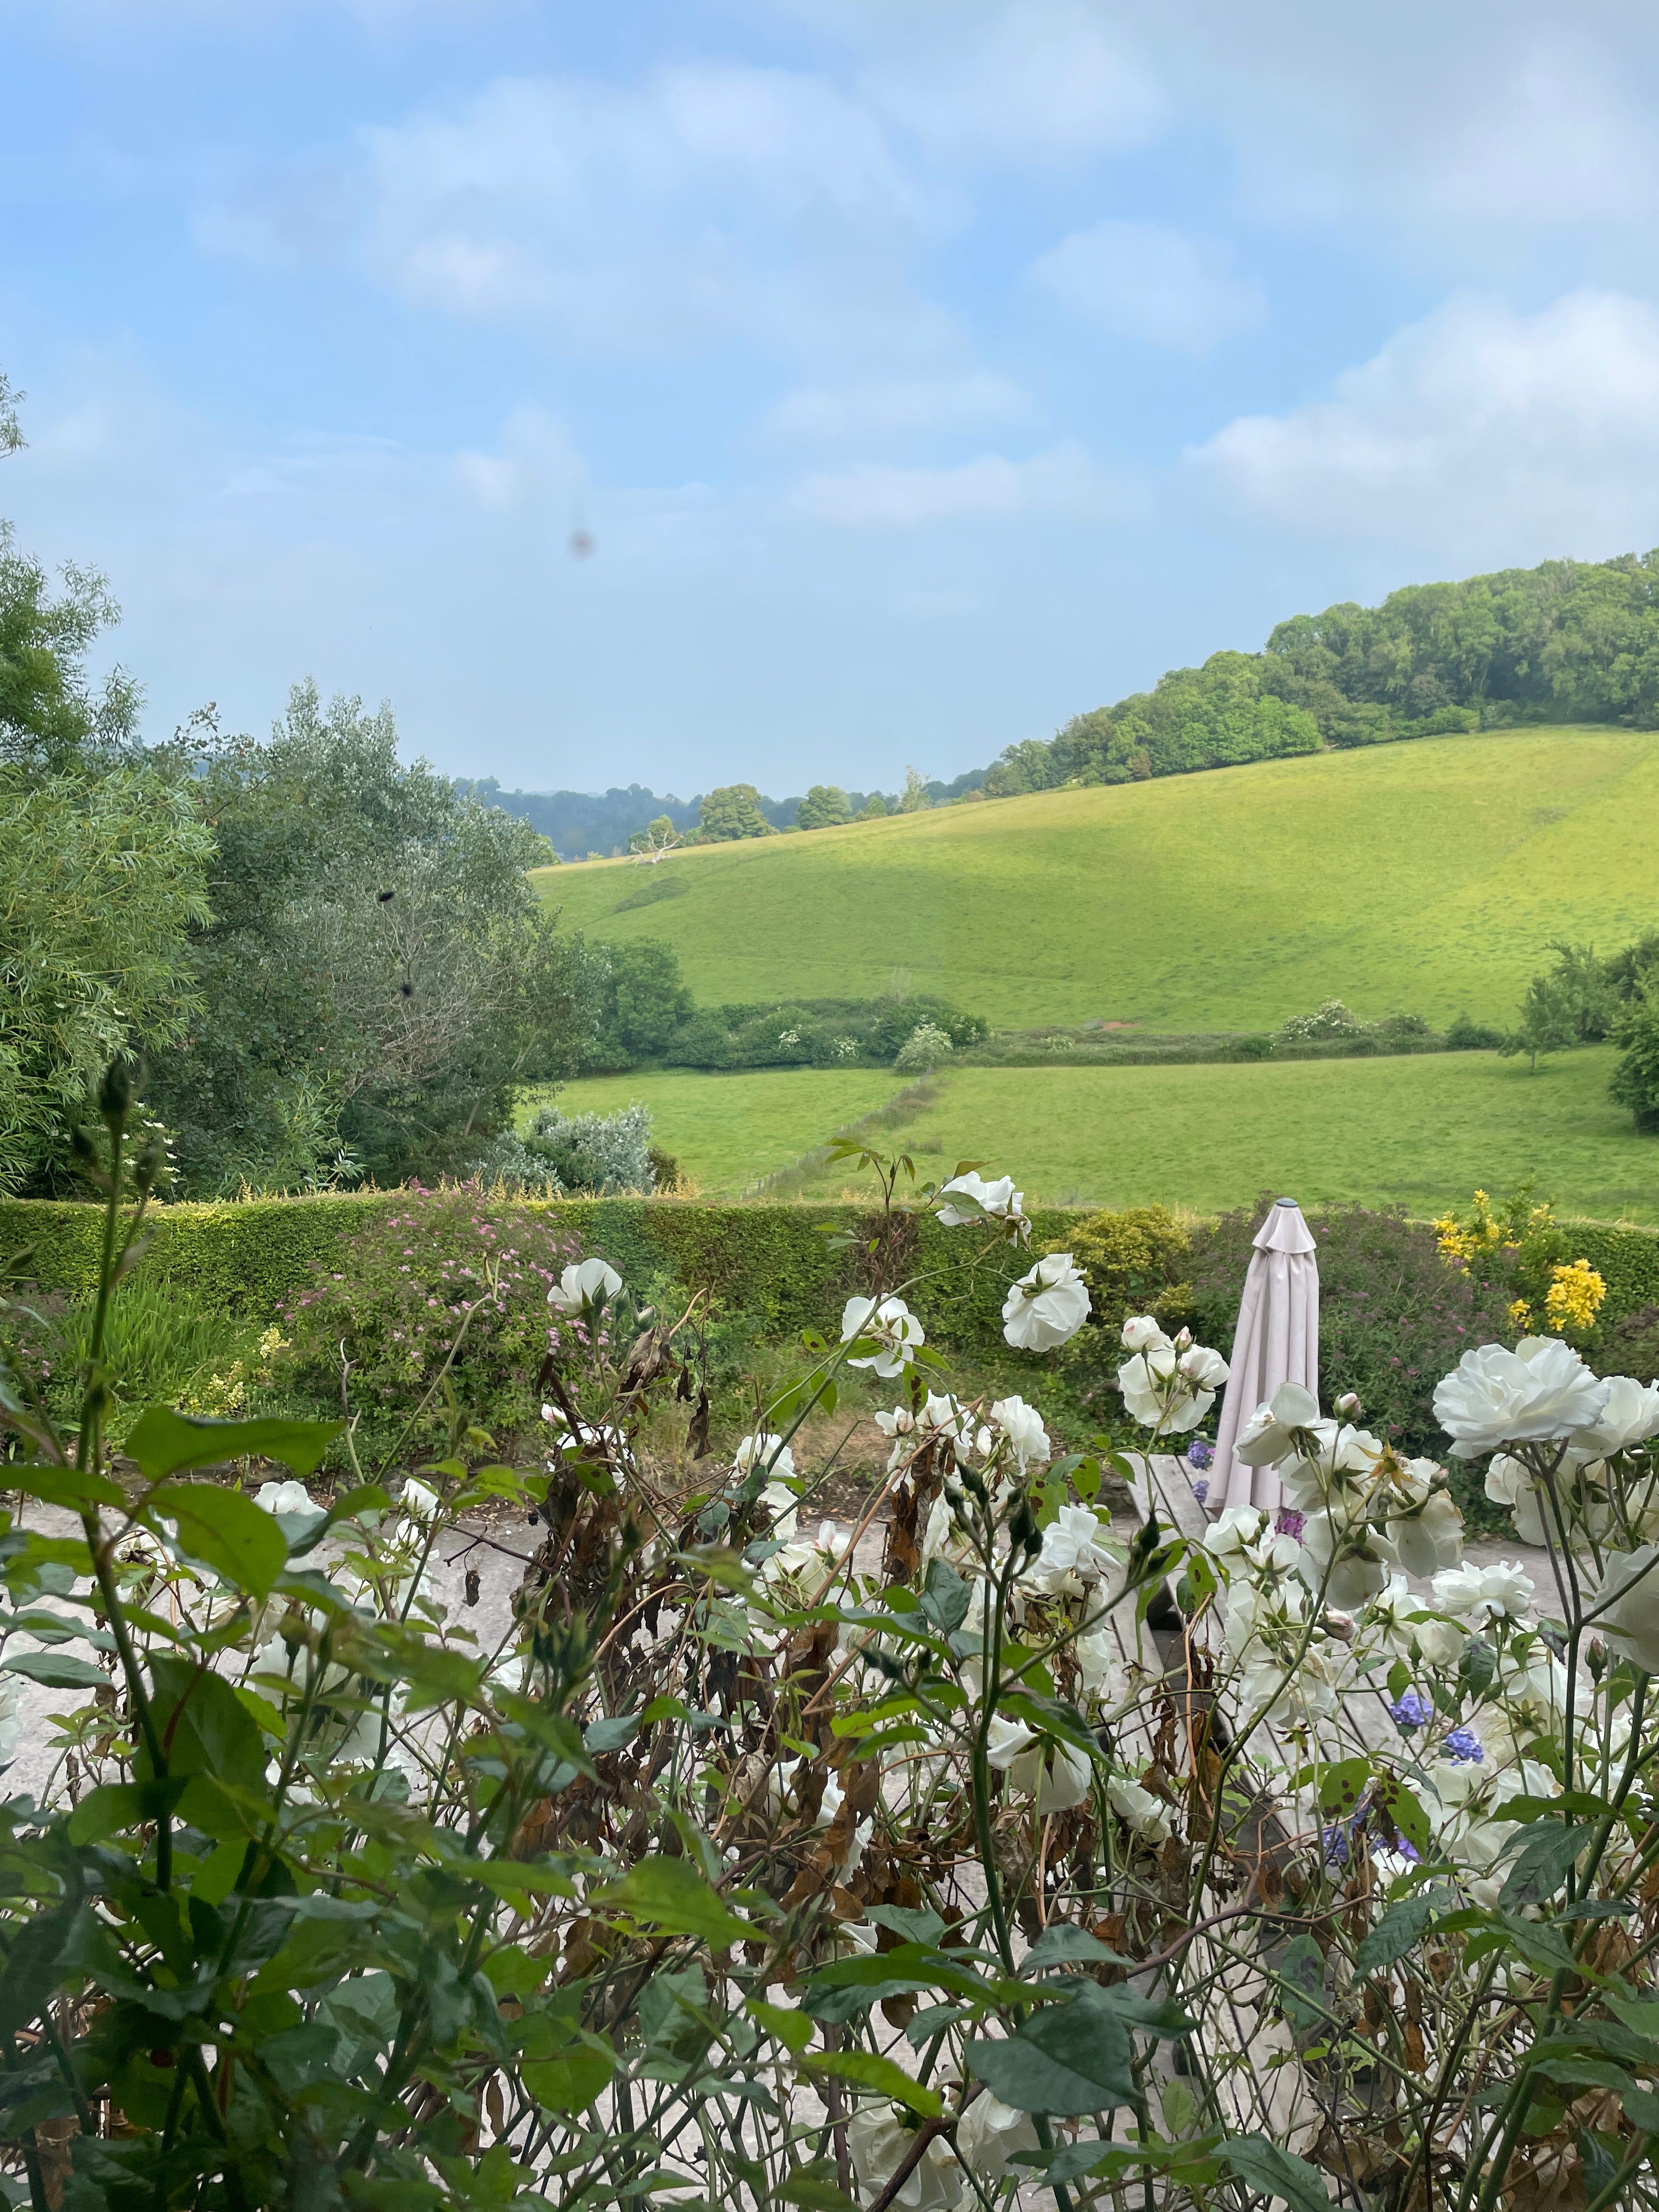 Views across the fields at our sewing retreat in Devon